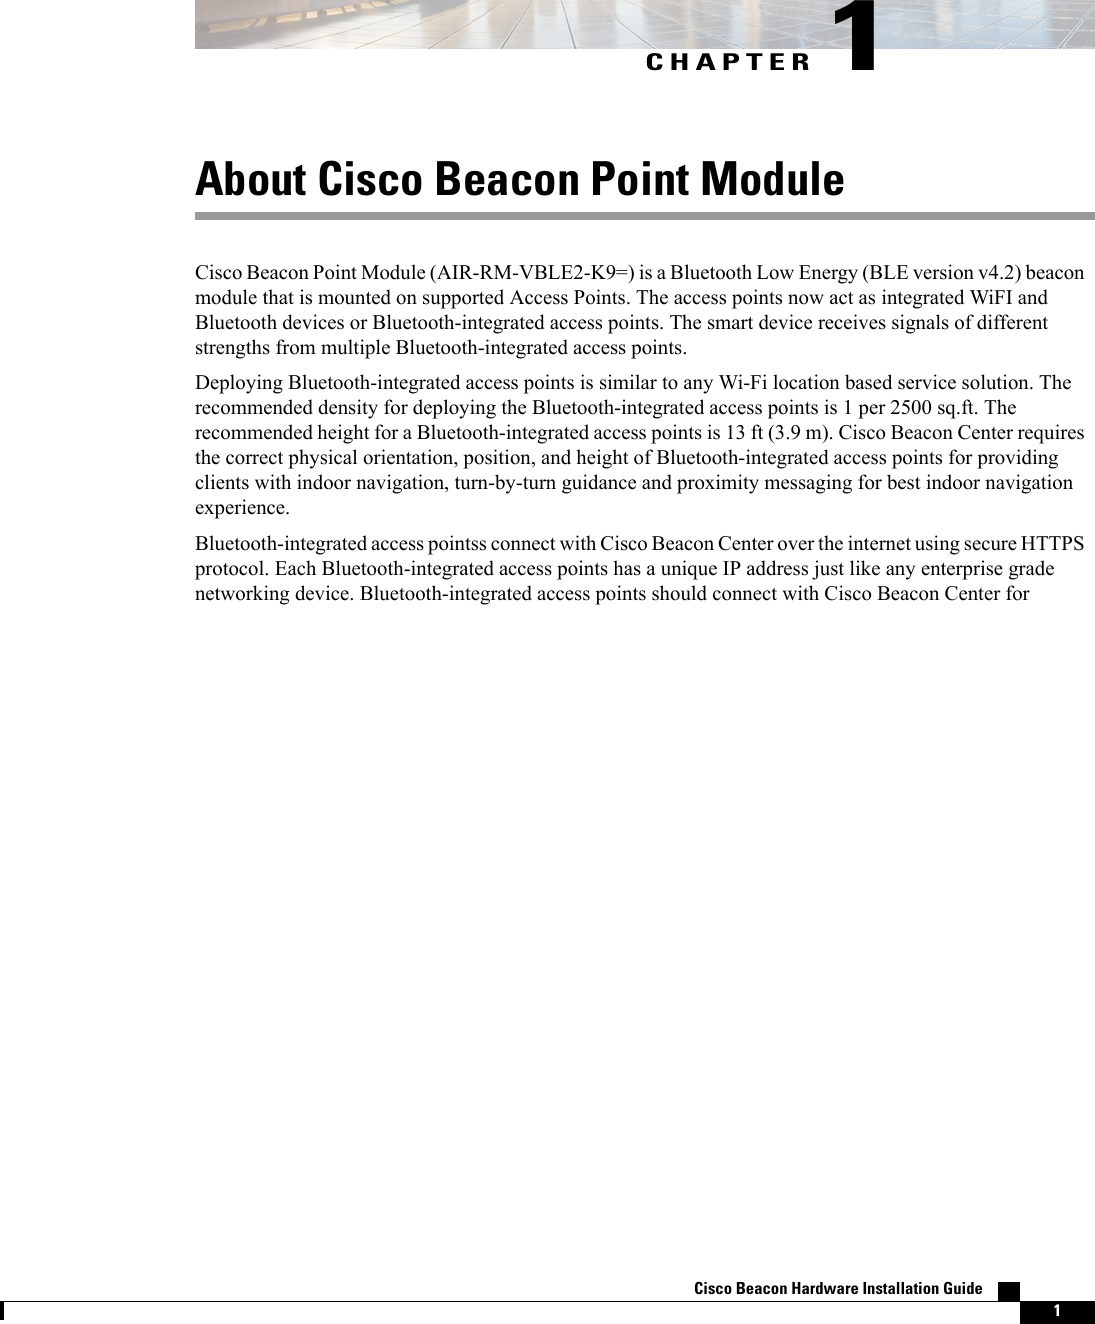 CHAPTER 1About Cisco Beacon Point ModuleCisco Beacon Point Module (AIR-RM-VBLE2-K9=) is a Bluetooth Low Energy (BLE version v4.2) beaconmodule that is mounted on supported Access Points. The access points now act as integrated WiFI andBluetooth devices or Bluetooth-integrated access points. The smart device receives signals of differentstrengths from multiple Bluetooth-integrated access points.Deploying Bluetooth-integrated access points is similar to any Wi-Fi location based service solution. Therecommended density for deploying the Bluetooth-integrated access points is 1 per 2500 sq.ft. Therecommended height for a Bluetooth-integrated access points is 13 ft (3.9 m). Cisco Beacon Center requiresthe correct physical orientation, position, and height of Bluetooth-integrated access points for providingclients with indoor navigation, turn-by-turn guidance and proximity messaging for best indoor navigationexperience.Bluetooth-integrated access pointss connect with Cisco Beacon Center over the internet using secure HTTPSprotocol. Each Bluetooth-integrated access points has a unique IP address just like any enterprise gradenetworking device. Bluetooth-integrated access points should connect with Cisco Beacon Center forCisco Beacon Hardware Installation Guide    1